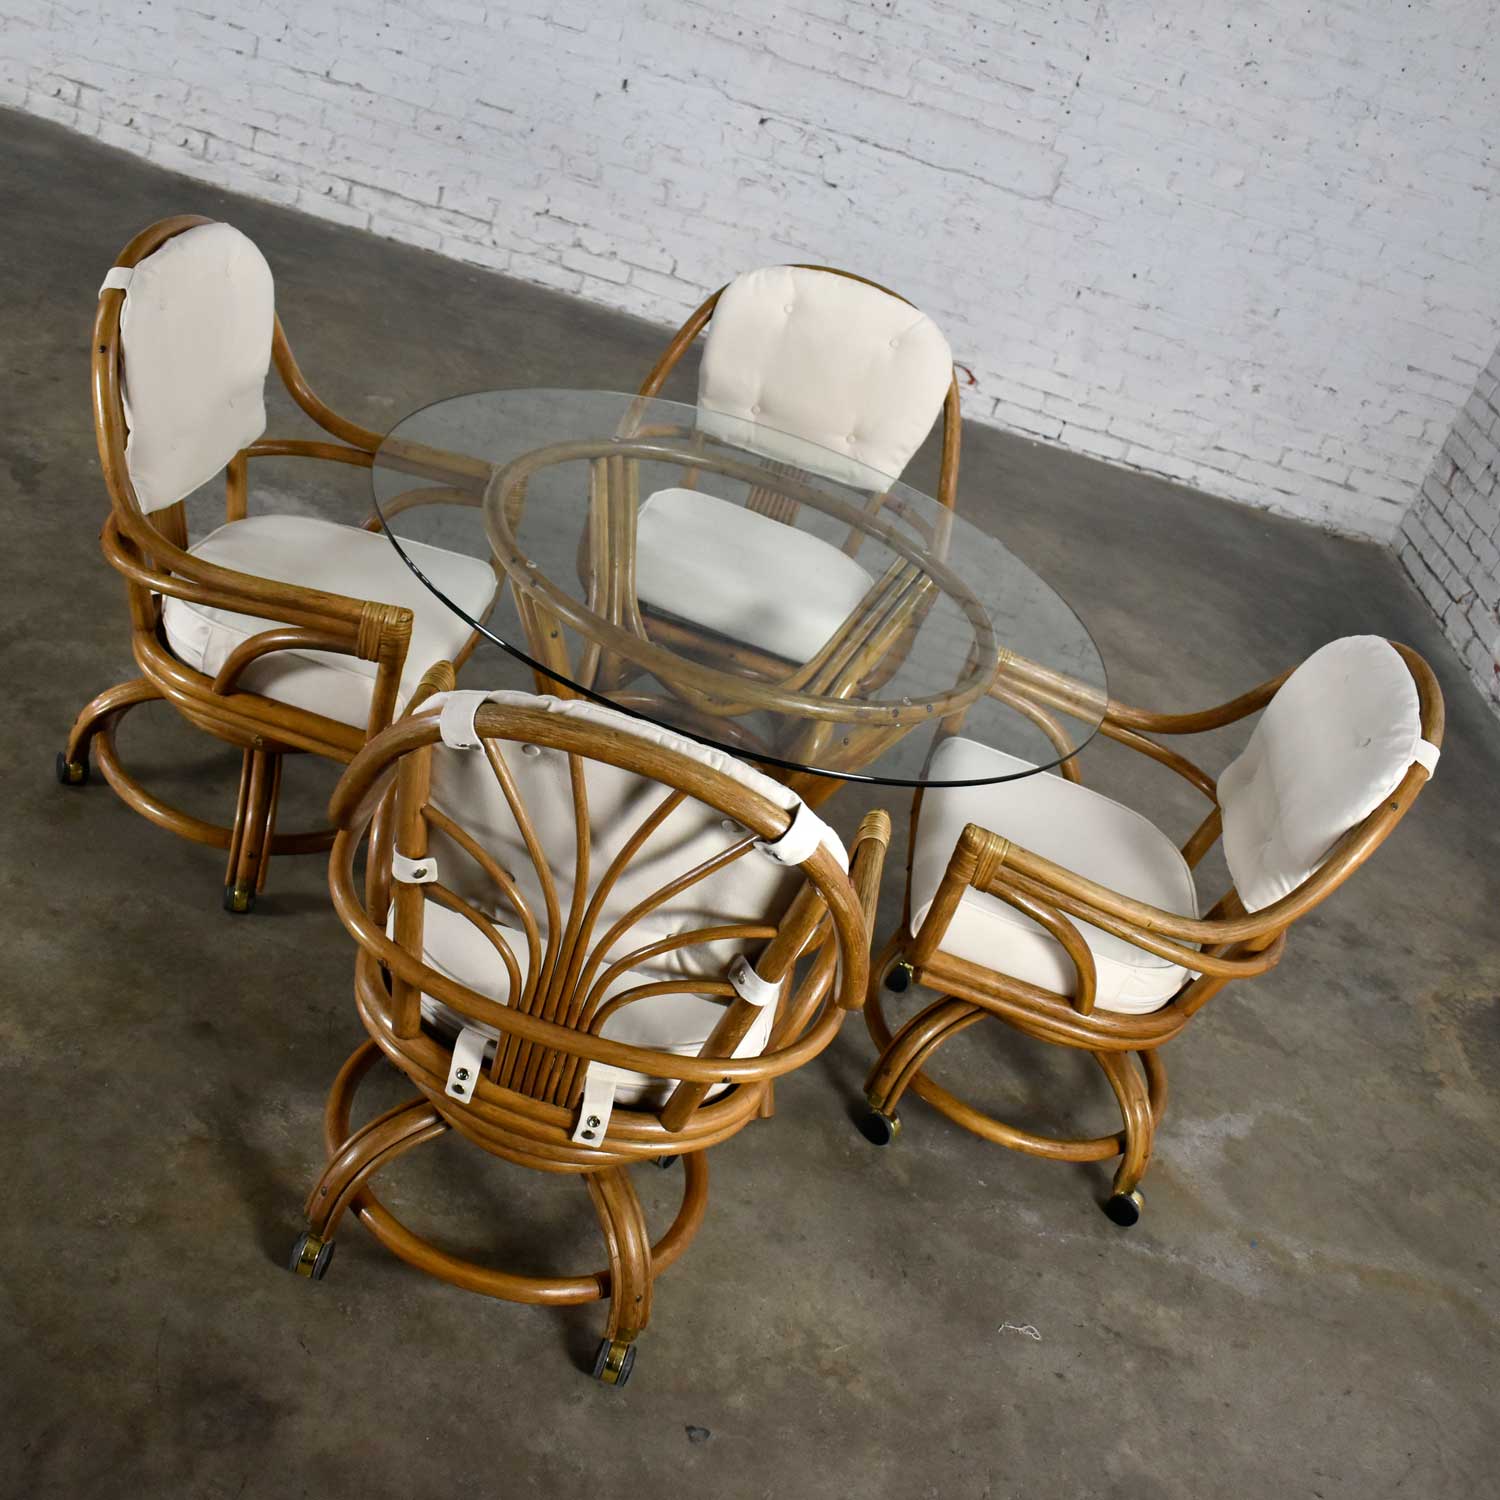 Pacific Rattan Game or Dining Table Round Glass Top & 4 Rolling Swivel Chairs New Canvas Upholstery